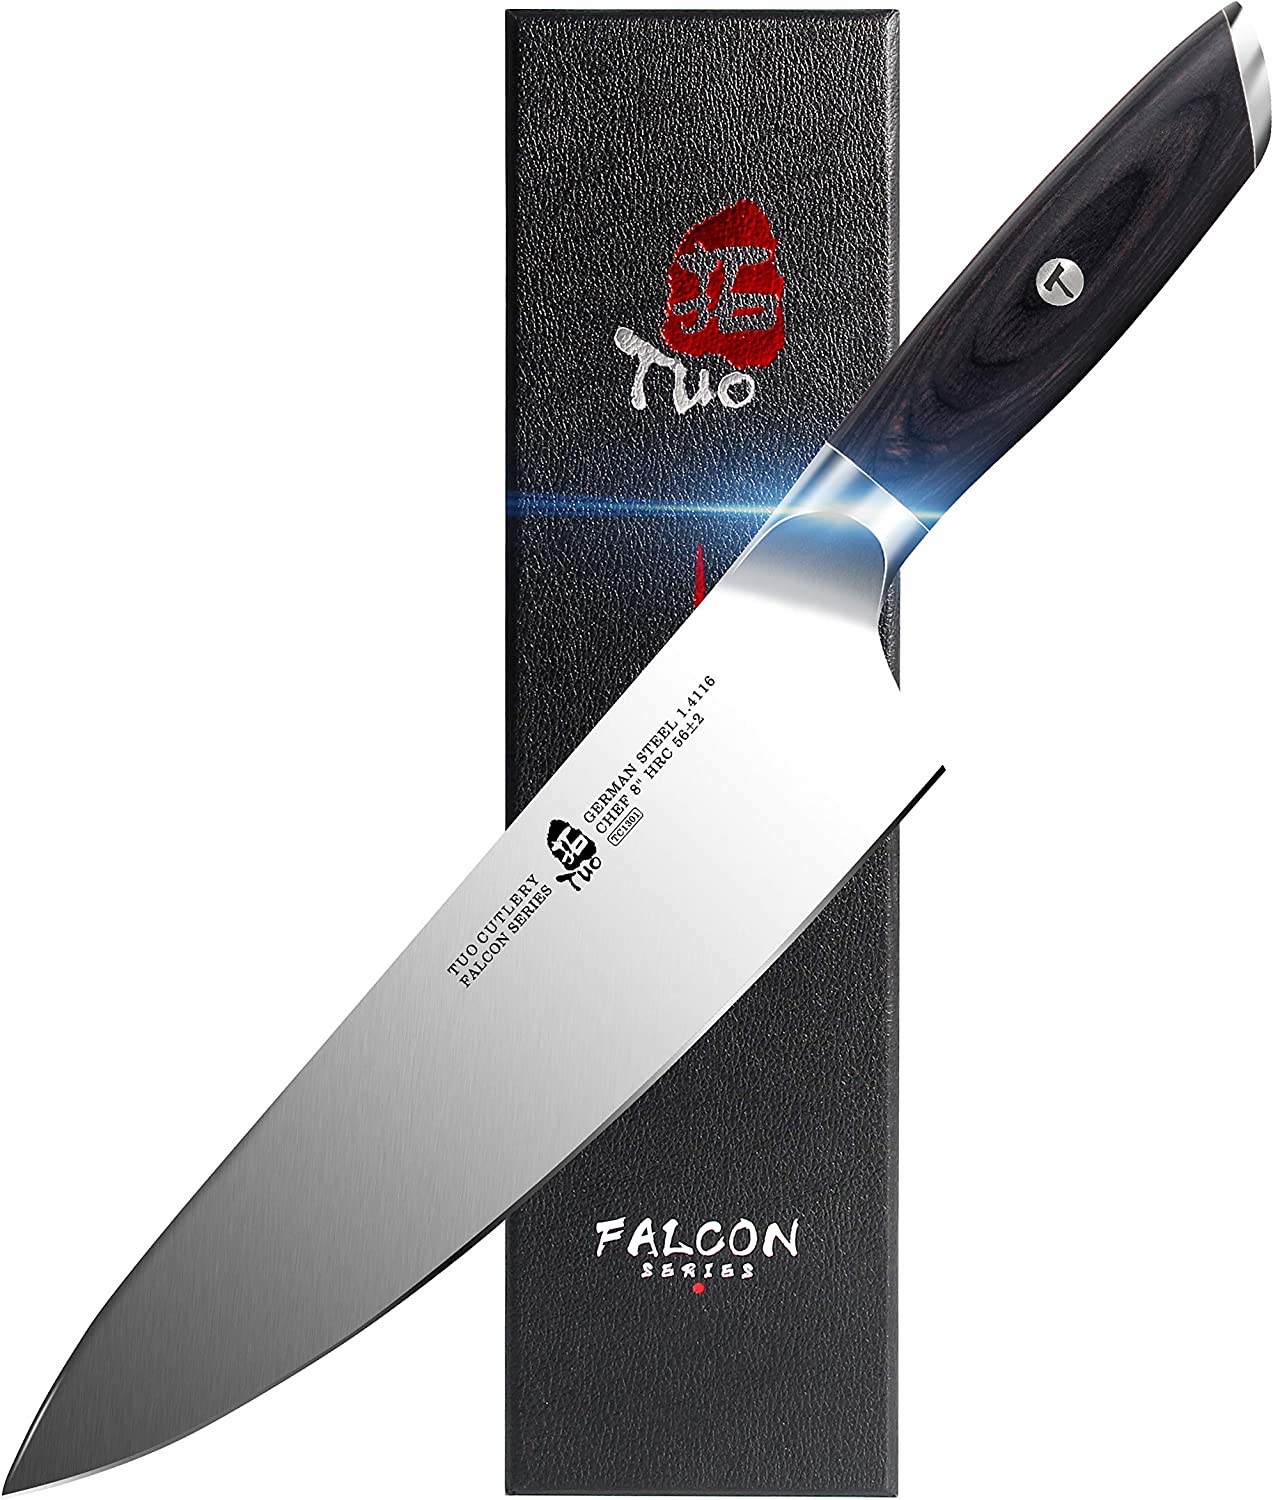 TUO chef knife